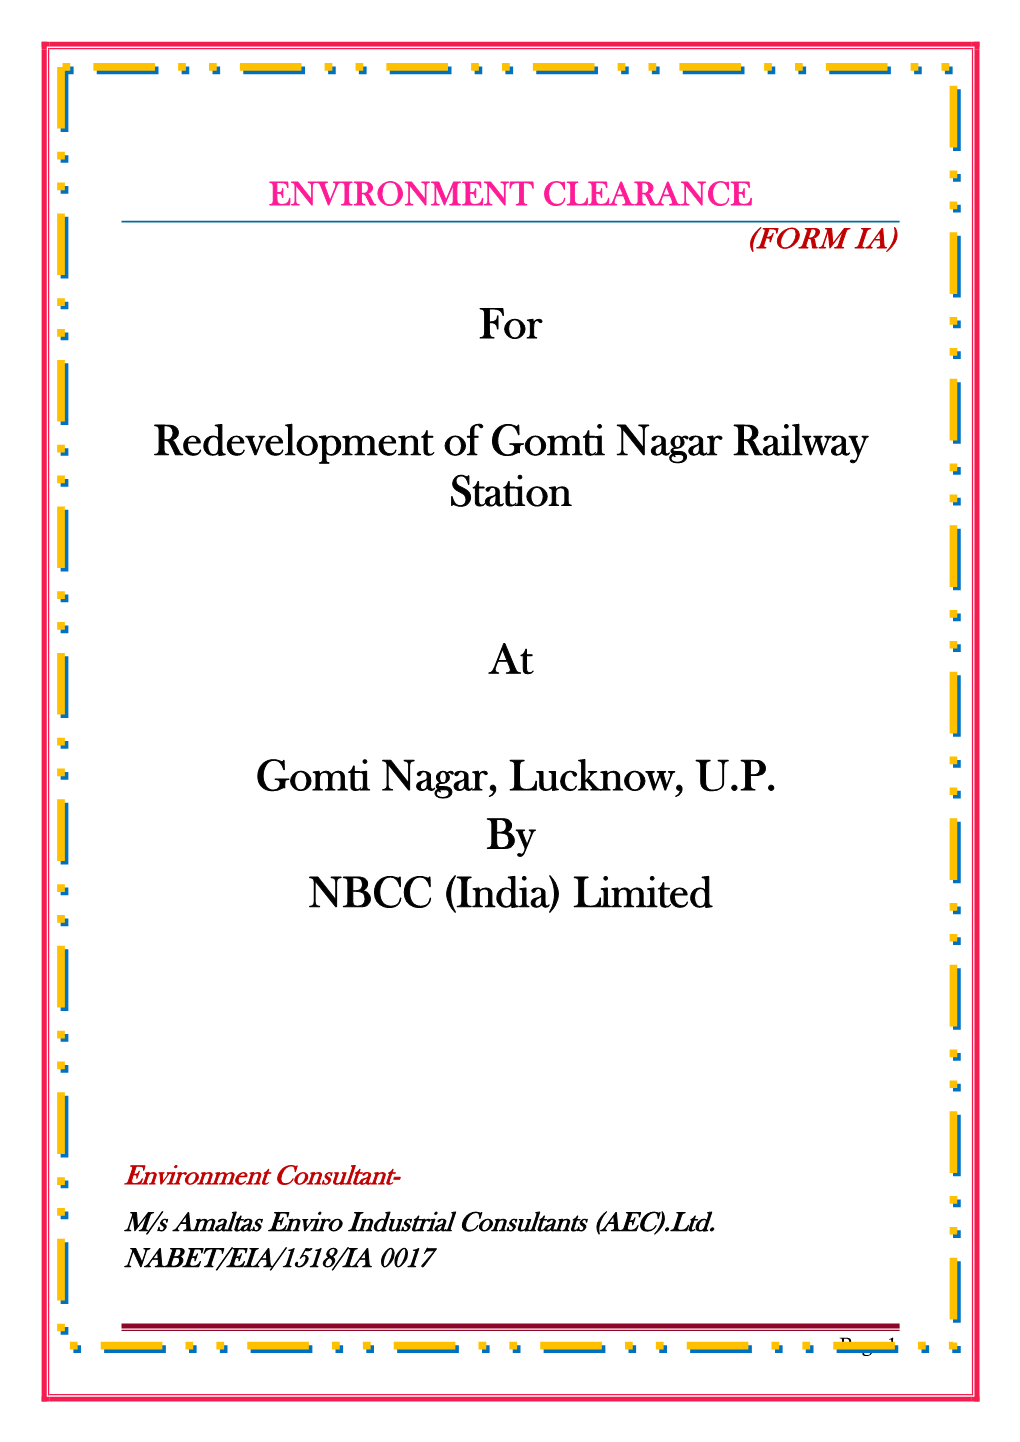 For Redevelopment of Gomti Nagar Railway Station at Gomti Nagar, Lucknow, up by NBCC